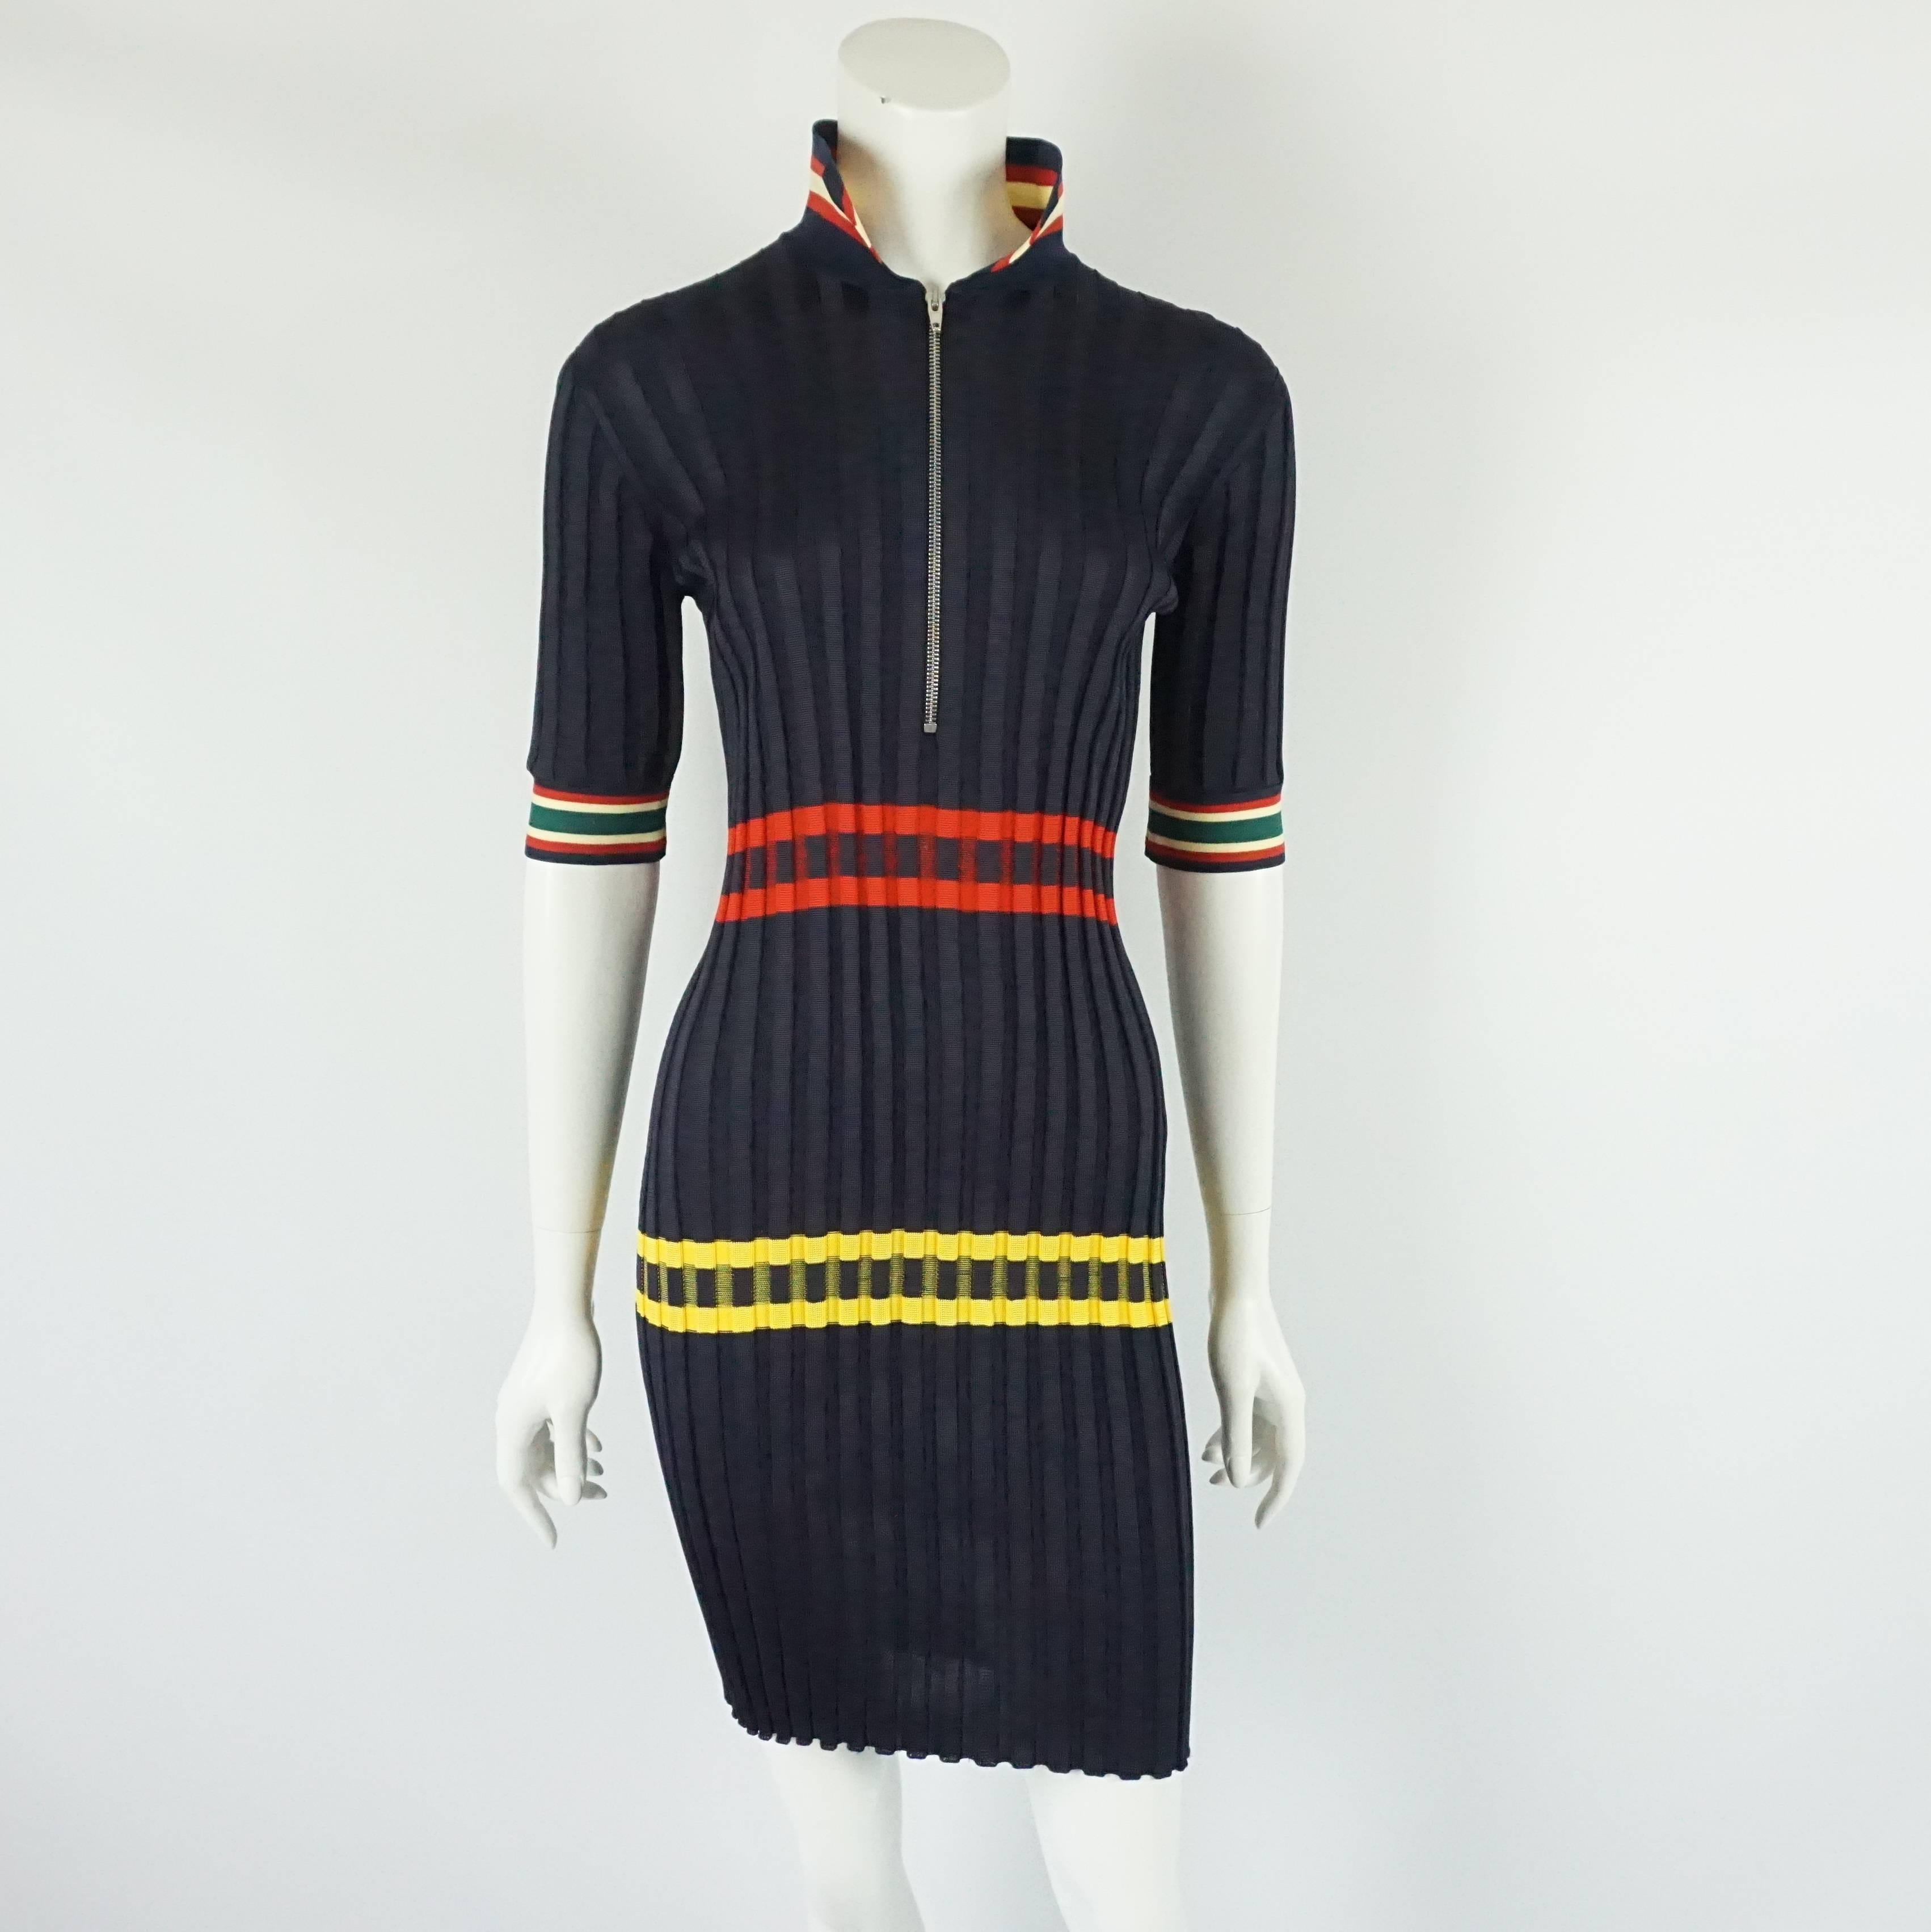 Celine Navy Knit Dress with Red and Yellow detail-XS This knit ribbed dress has a collar and cuff on sleeves that have red and yellow striped detail. The waist and hip area also have striped detail. It has a front silver zipper. The dress is in